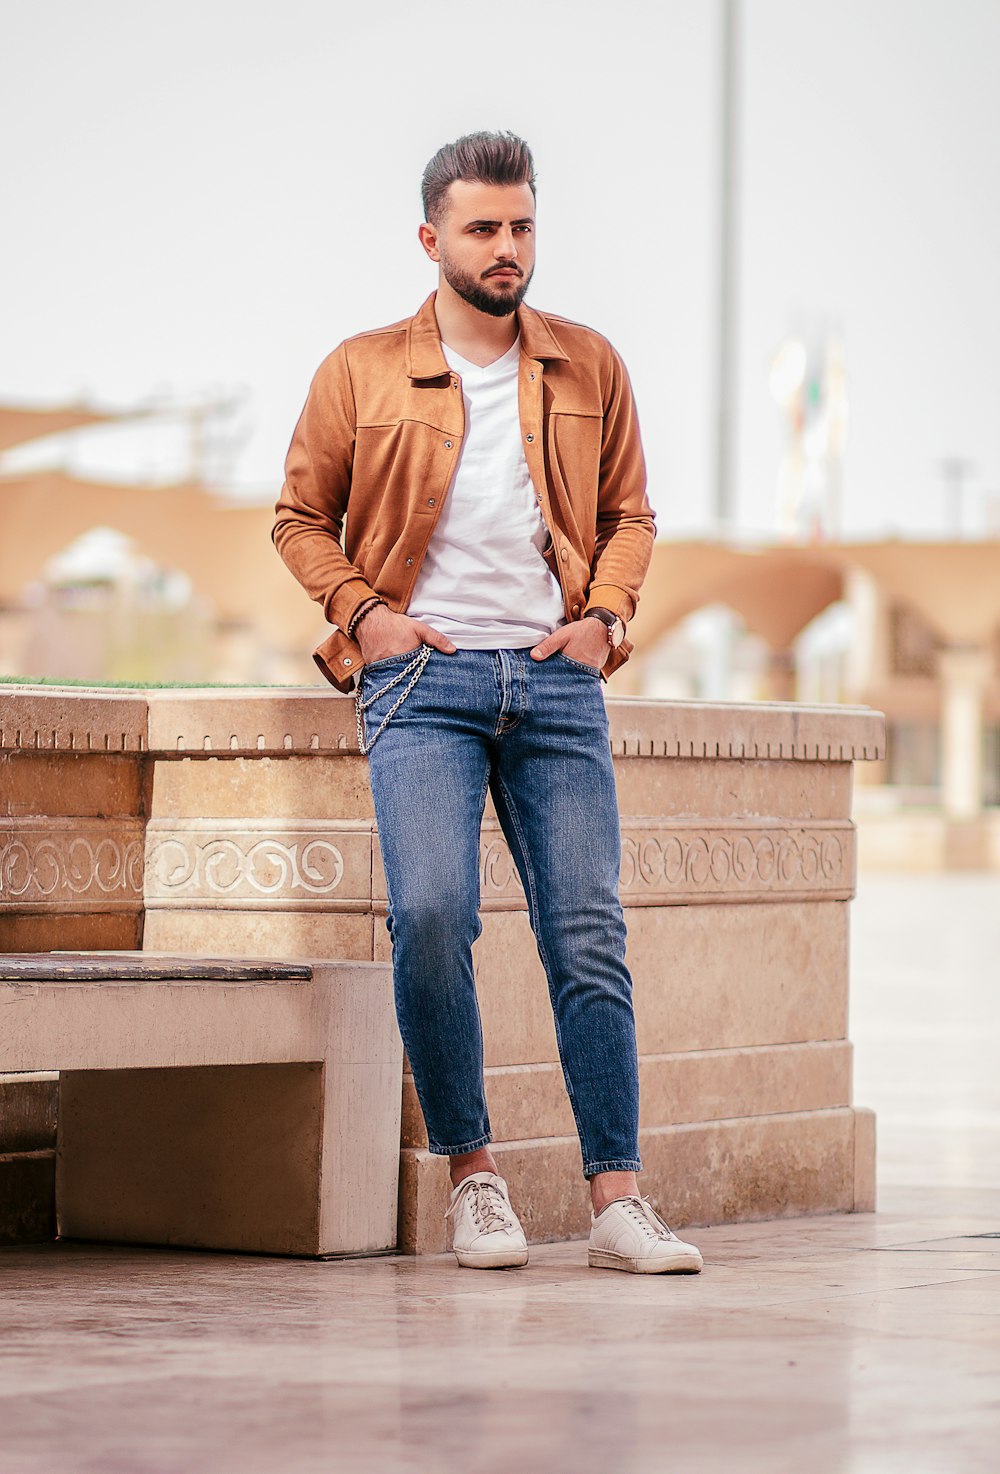 man in brown zip up jacket and blue denim jeans sitting on brown concrete bench during